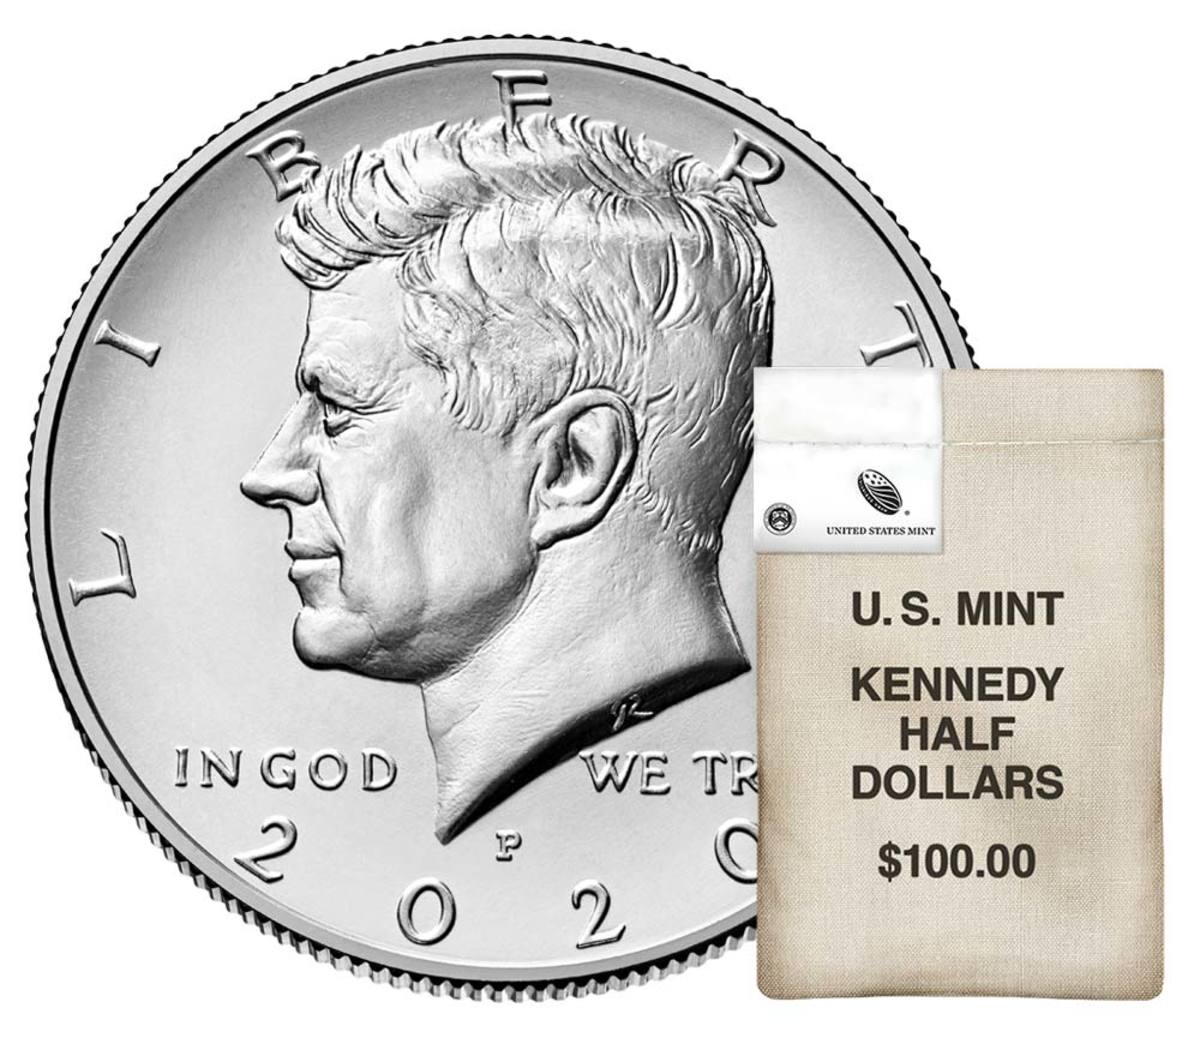 On June 4, the Mint is releasing 2020 Kennedy half dollar rolls and bags. (All images courtesy U.S. Mint.)